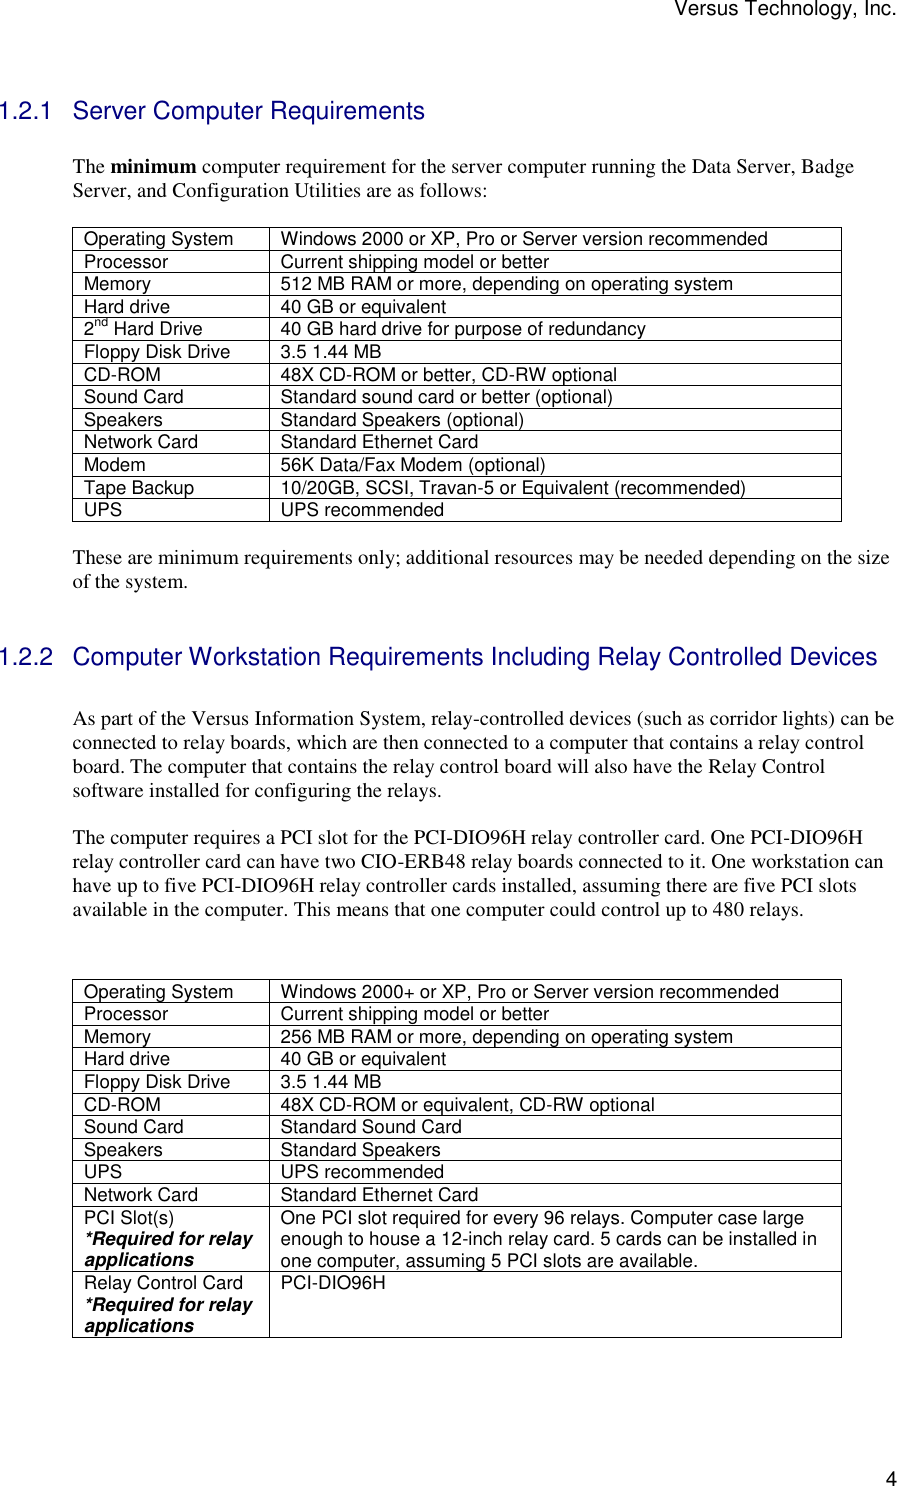 Versus Technology, Inc.  4 1.2.1  Server Computer Requirements  The minimum computer requirement for the server computer running the Data Server, Badge Server, and Configuration Utilities are as follows:  Operating System Windows 2000 or XP, Pro or Server version recommended Processor Current shipping model or better Memory 512 MB RAM or more, depending on operating system Hard drive 40 GB or equivalent  2nd Hard Drive 40 GB hard drive for purpose of redundancy Floppy Disk Drive 3.5 1.44 MB CD-ROM 48X CD-ROM or better, CD-RW optional Sound Card Standard sound card or better (optional) Speakers Standard Speakers (optional) Network Card Standard Ethernet Card Modem 56K Data/Fax Modem (optional) Tape Backup 10/20GB, SCSI, Travan-5 or Equivalent (recommended) UPS UPS recommended  These are minimum requirements only; additional resources may be needed depending on the size of the system.  1.2.2  Computer Workstation Requirements Including Relay Controlled Devices  As part of the Versus Information System, relay-controlled devices (such as corridor lights) can be connected to relay boards, which are then connected to a computer that contains a relay control board. The computer that contains the relay control board will also have the Relay Control software installed for configuring the relays.  The computer requires a PCI slot for the PCI-DIO96H relay controller card. One PCI-DIO96H relay controller card can have two CIO-ERB48 relay boards connected to it. One workstation can have up to five PCI-DIO96H relay controller cards installed, assuming there are five PCI slots available in the computer. This means that one computer could control up to 480 relays.   Operating System Windows 2000+ or XP, Pro or Server version recommended Processor Current shipping model or better Memory 256 MB RAM or more, depending on operating system Hard drive 40 GB or equivalent Floppy Disk Drive 3.5 1.44 MB CD-ROM 48X CD-ROM or equivalent, CD-RW optional Sound Card Standard Sound Card Speakers Standard Speakers UPS UPS recommended Network Card Standard Ethernet Card PCI Slot(s) *Required for relay applications One PCI slot required for every 96 relays. Computer case large enough to house a 12-inch relay card. 5 cards can be installed in one computer, assuming 5 PCI slots are available. Relay Control Card *Required for relay applications PCI-DIO96H  